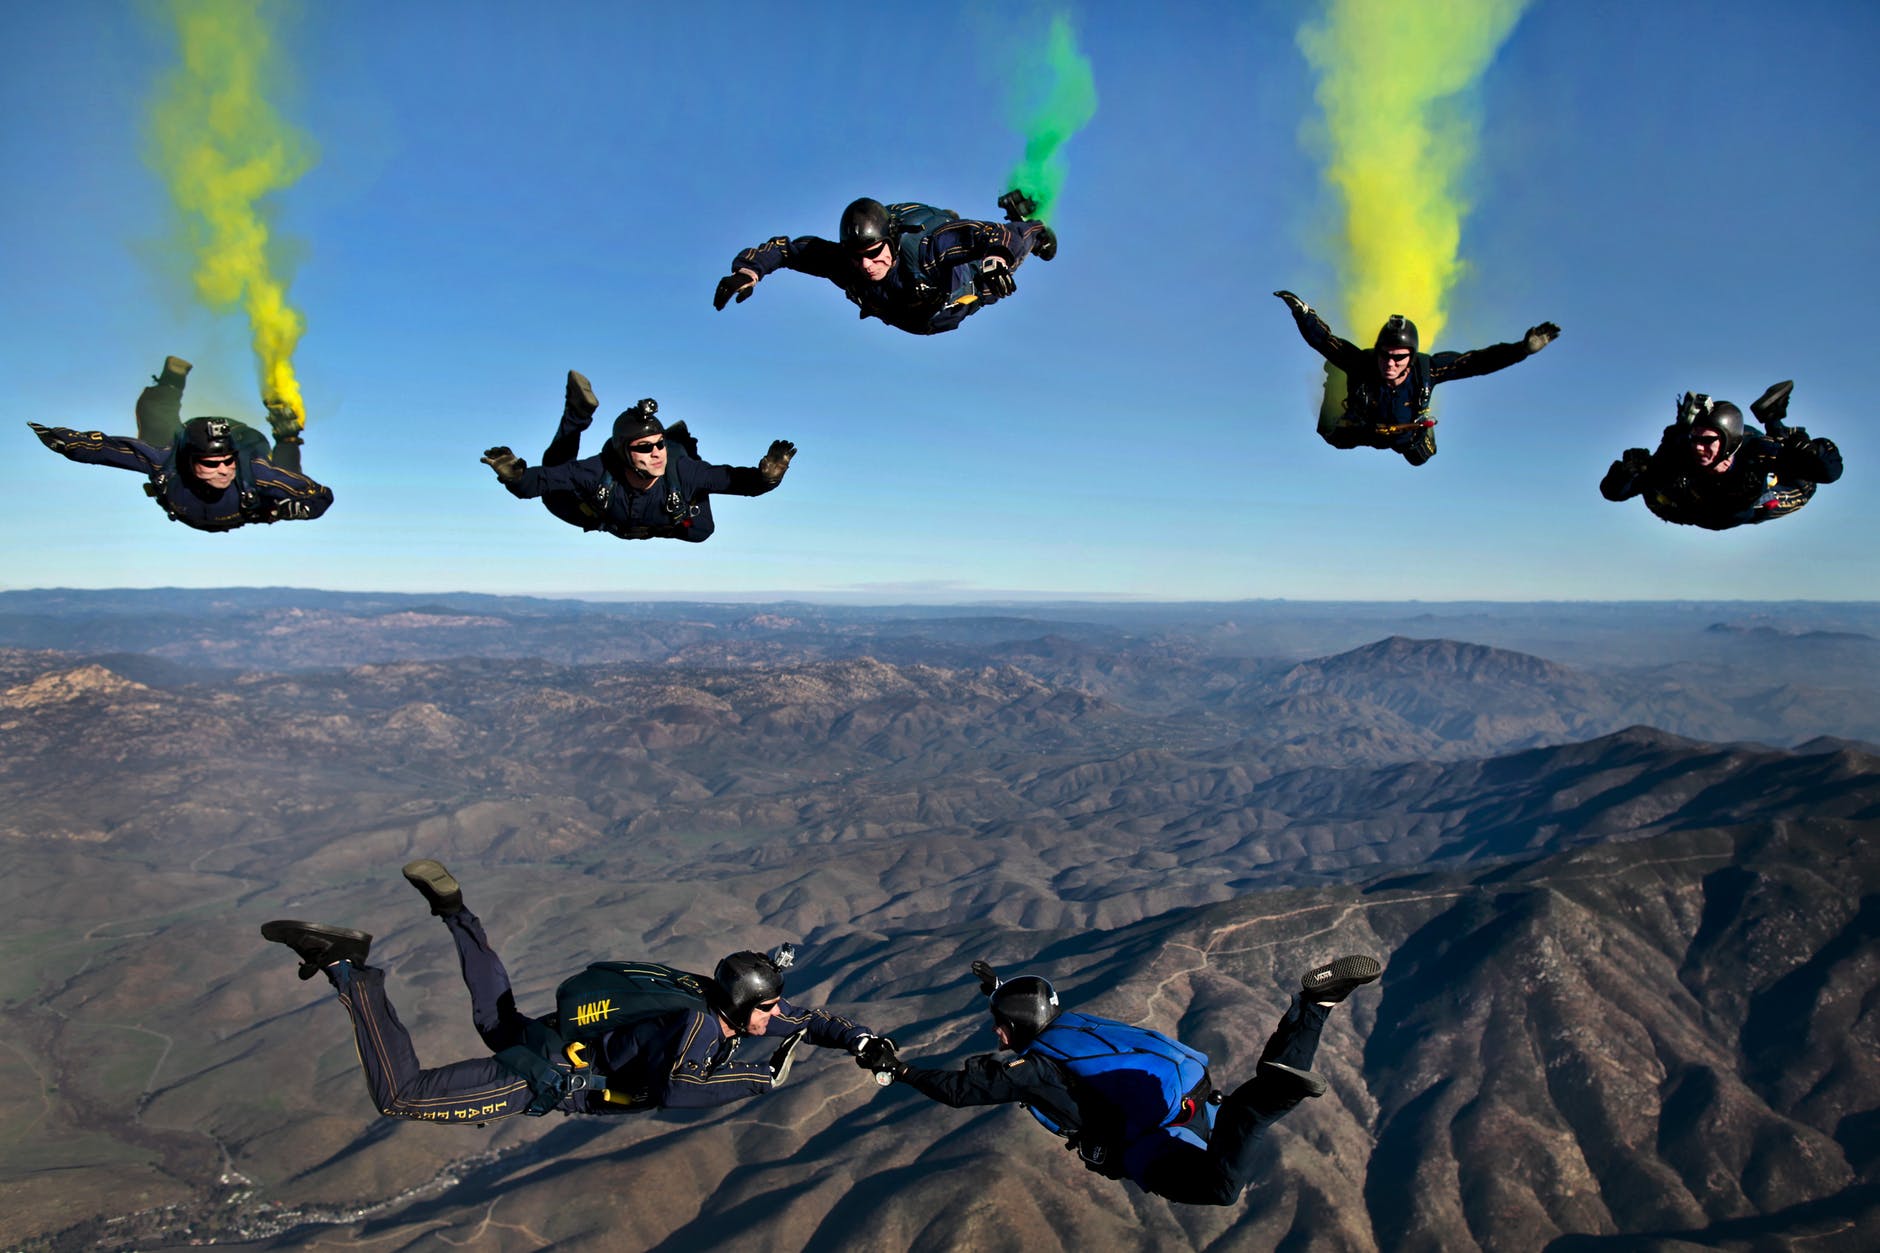 Skydiving can make your travel unforgettable